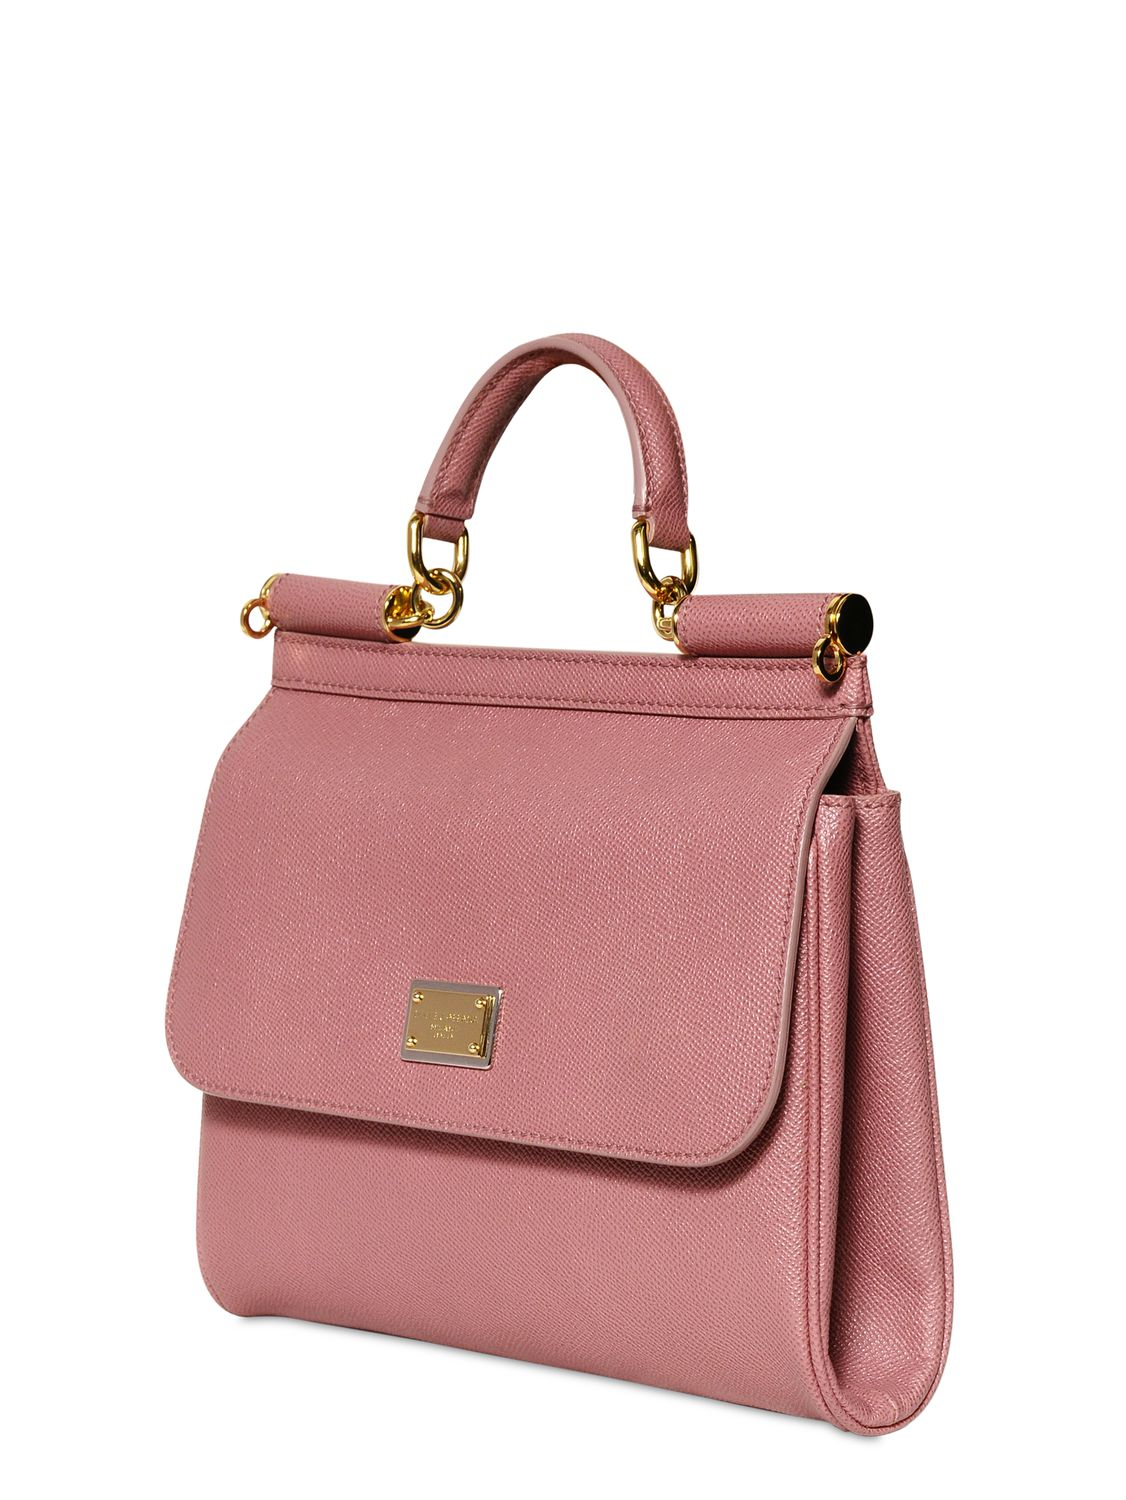 Lyst - Dolce & Gabbana Miss Sicily Slim Saffiano Leather Bag in Pink